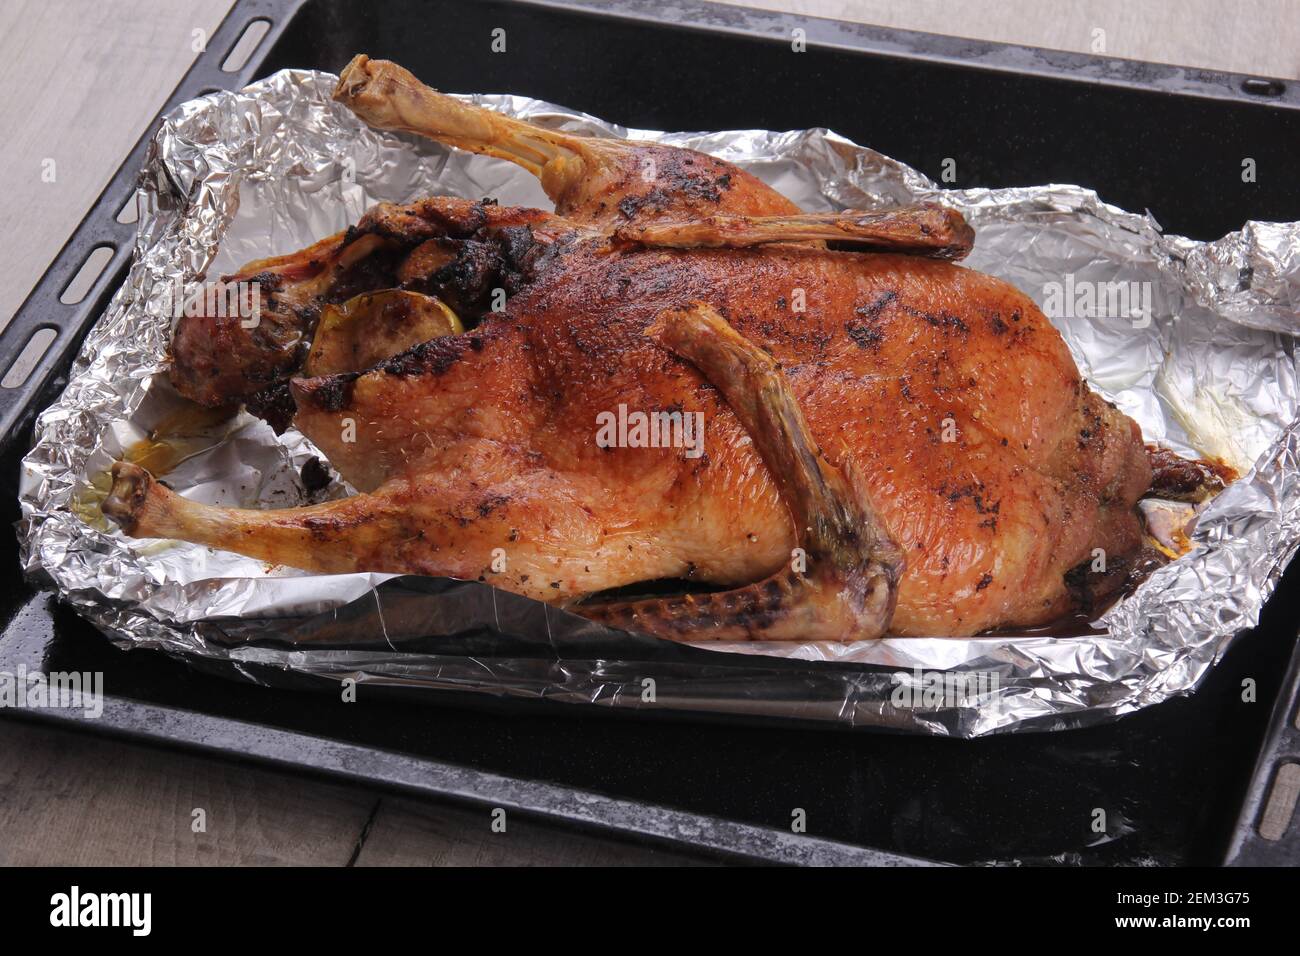 Roast Christmas duck stuffed with fruits on oven plate and aluminium foil Stock Photo